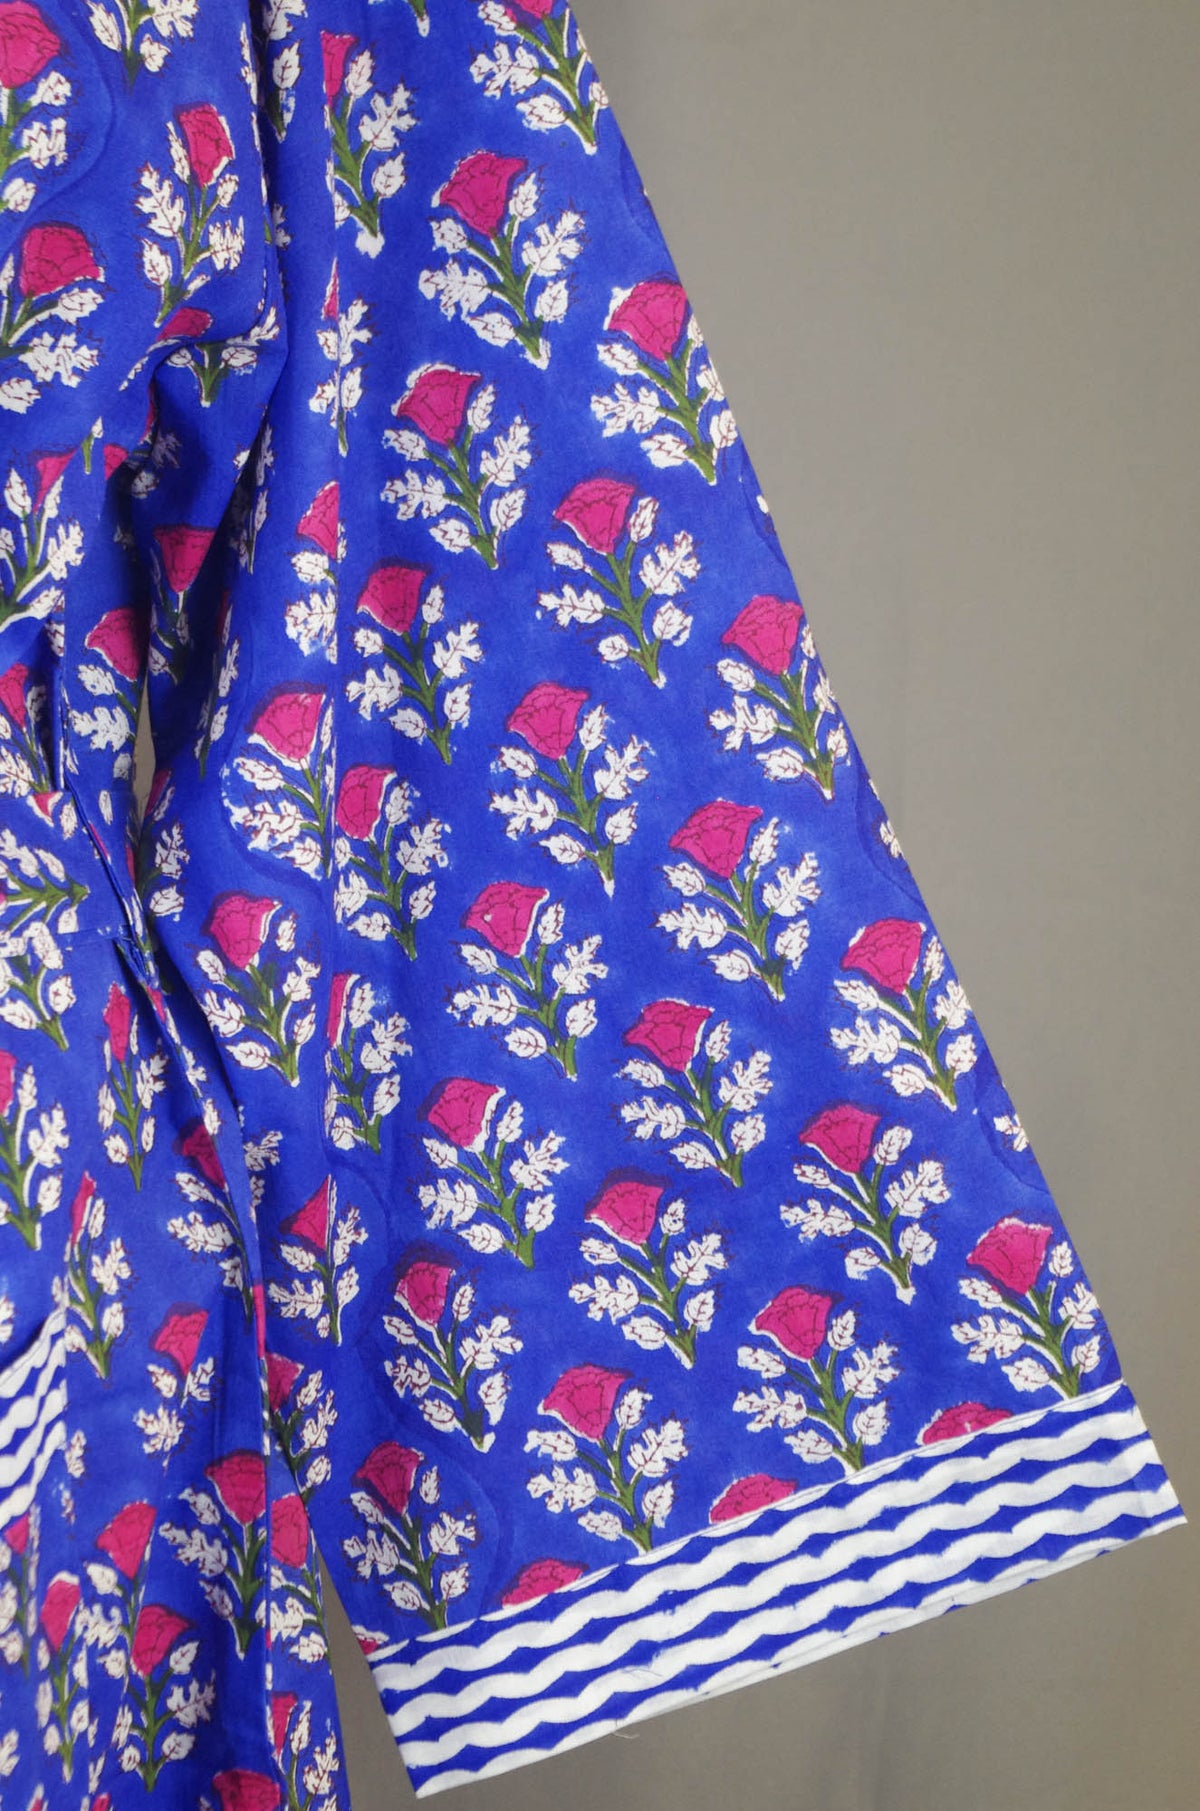 Dark Blue With Red Floral Motifs Cotton Kimono Dressing Gown